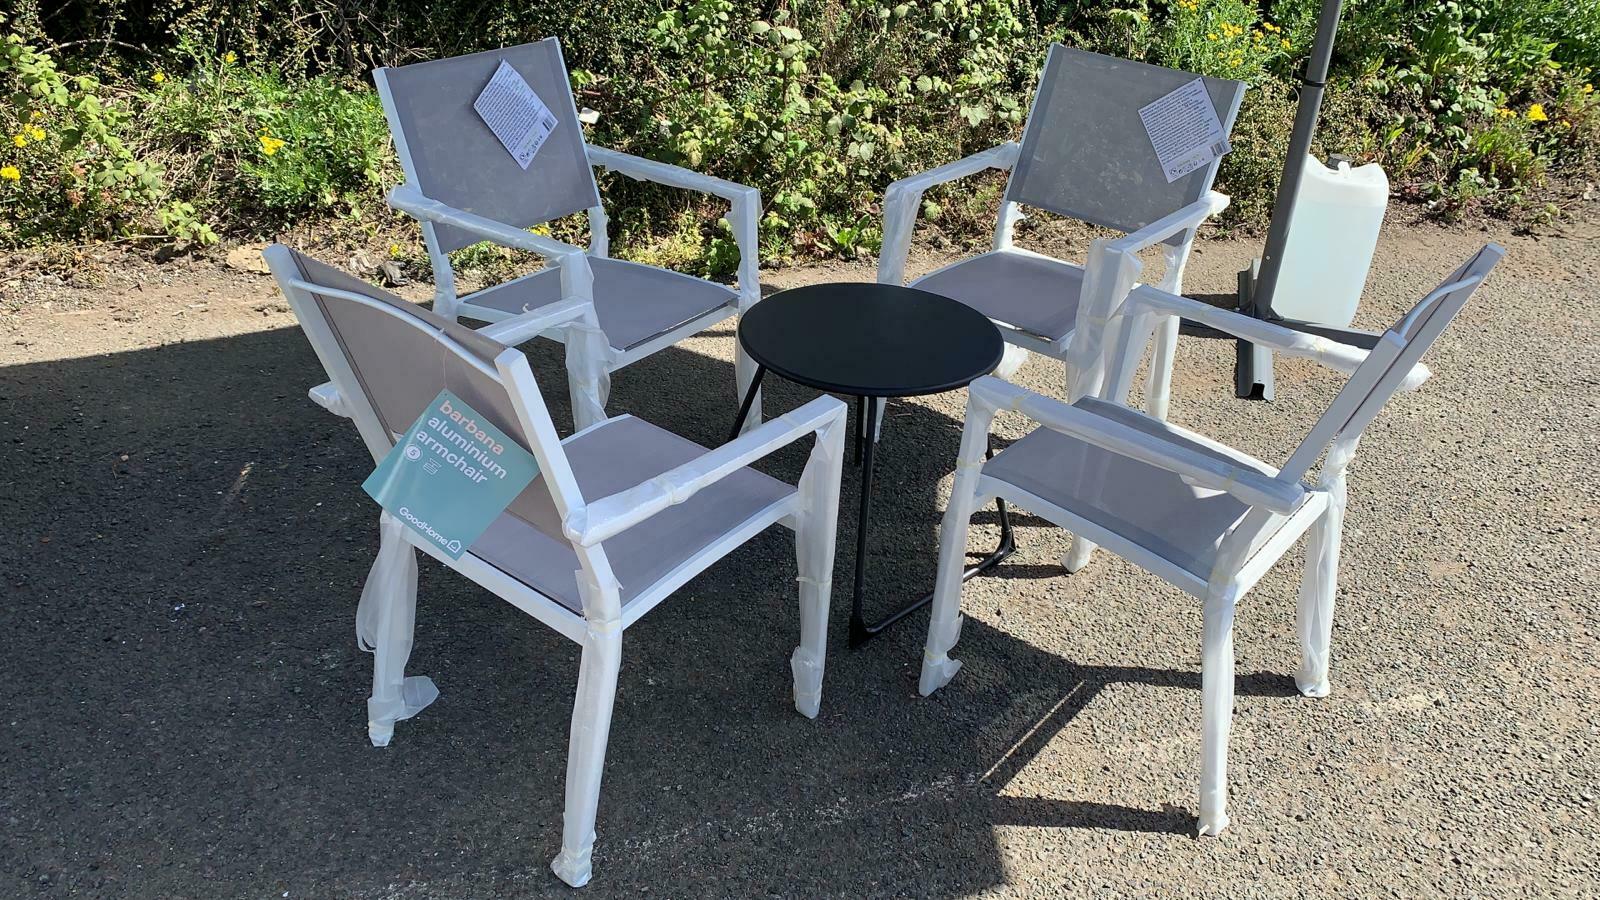 Outside Garden Furniture Set 4 Chairs and Coffee Table Set Grey - 5 Piece Garden Furniture